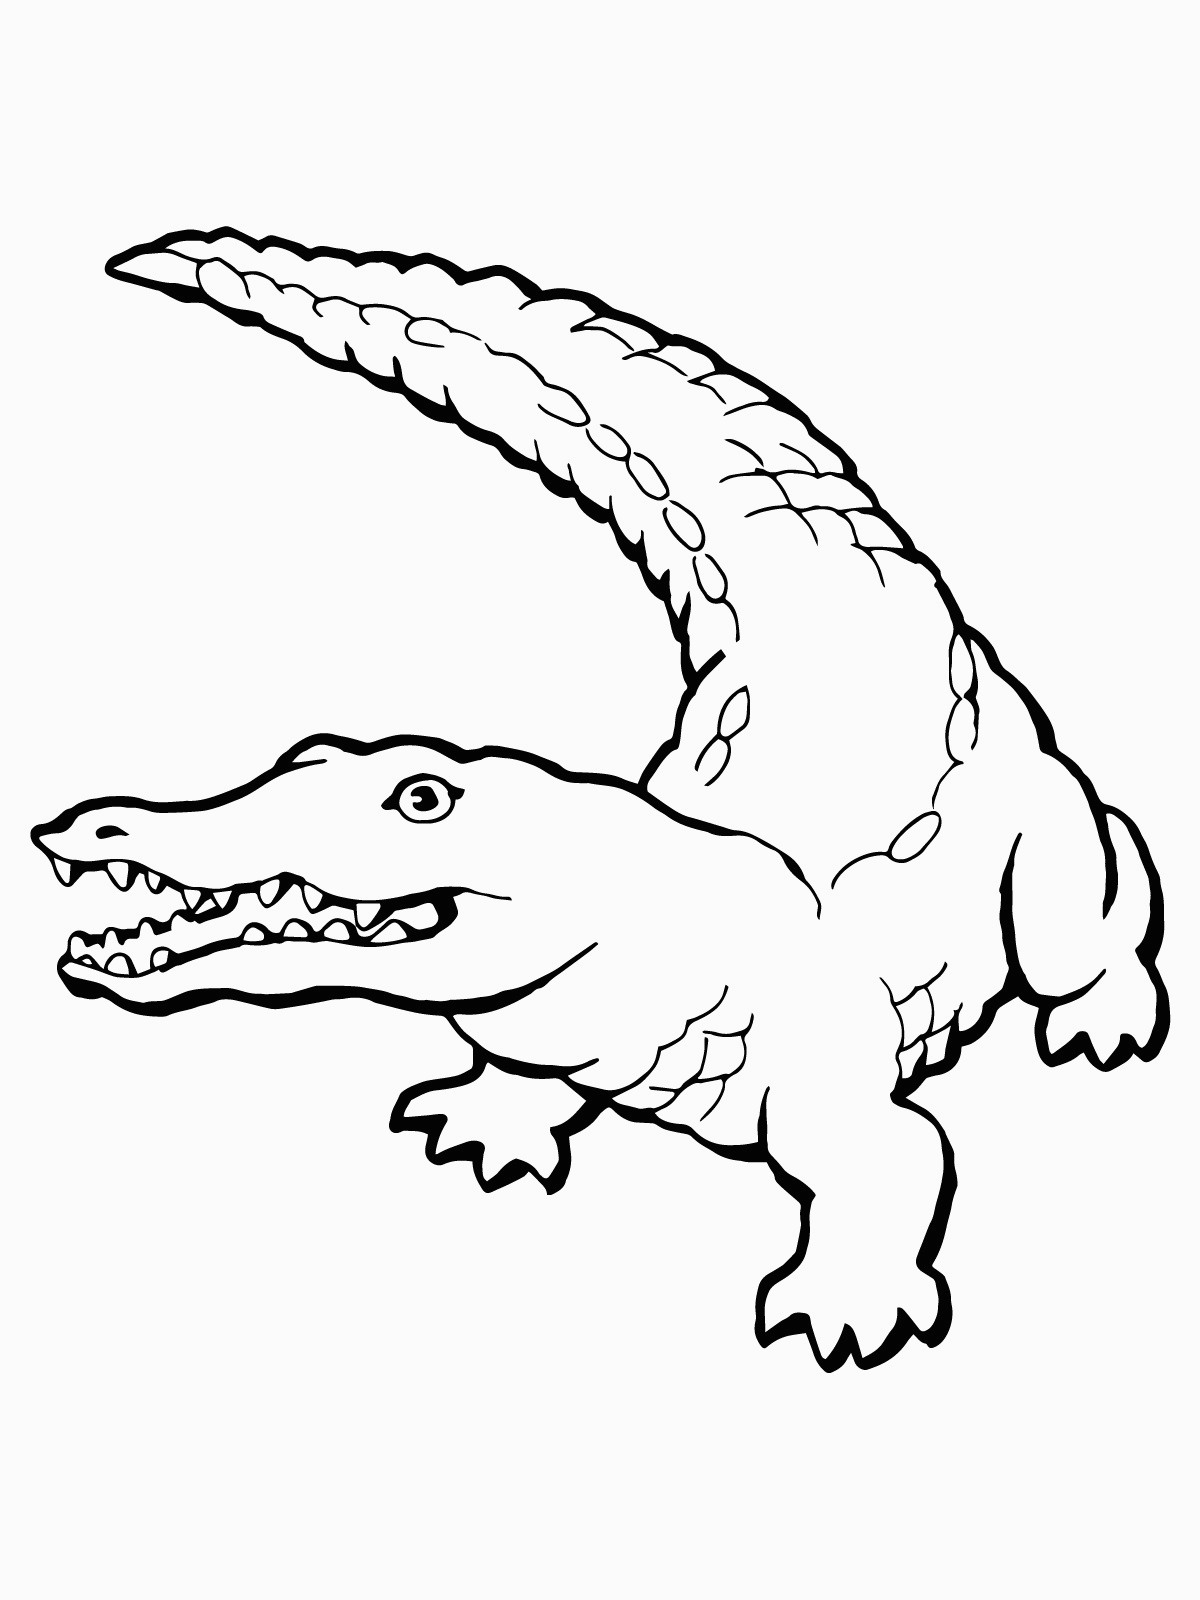 Free Printable Crocodile Coloring Pages For Kids For Coloring Pages - Free Printable Pictures Of Crocodiles